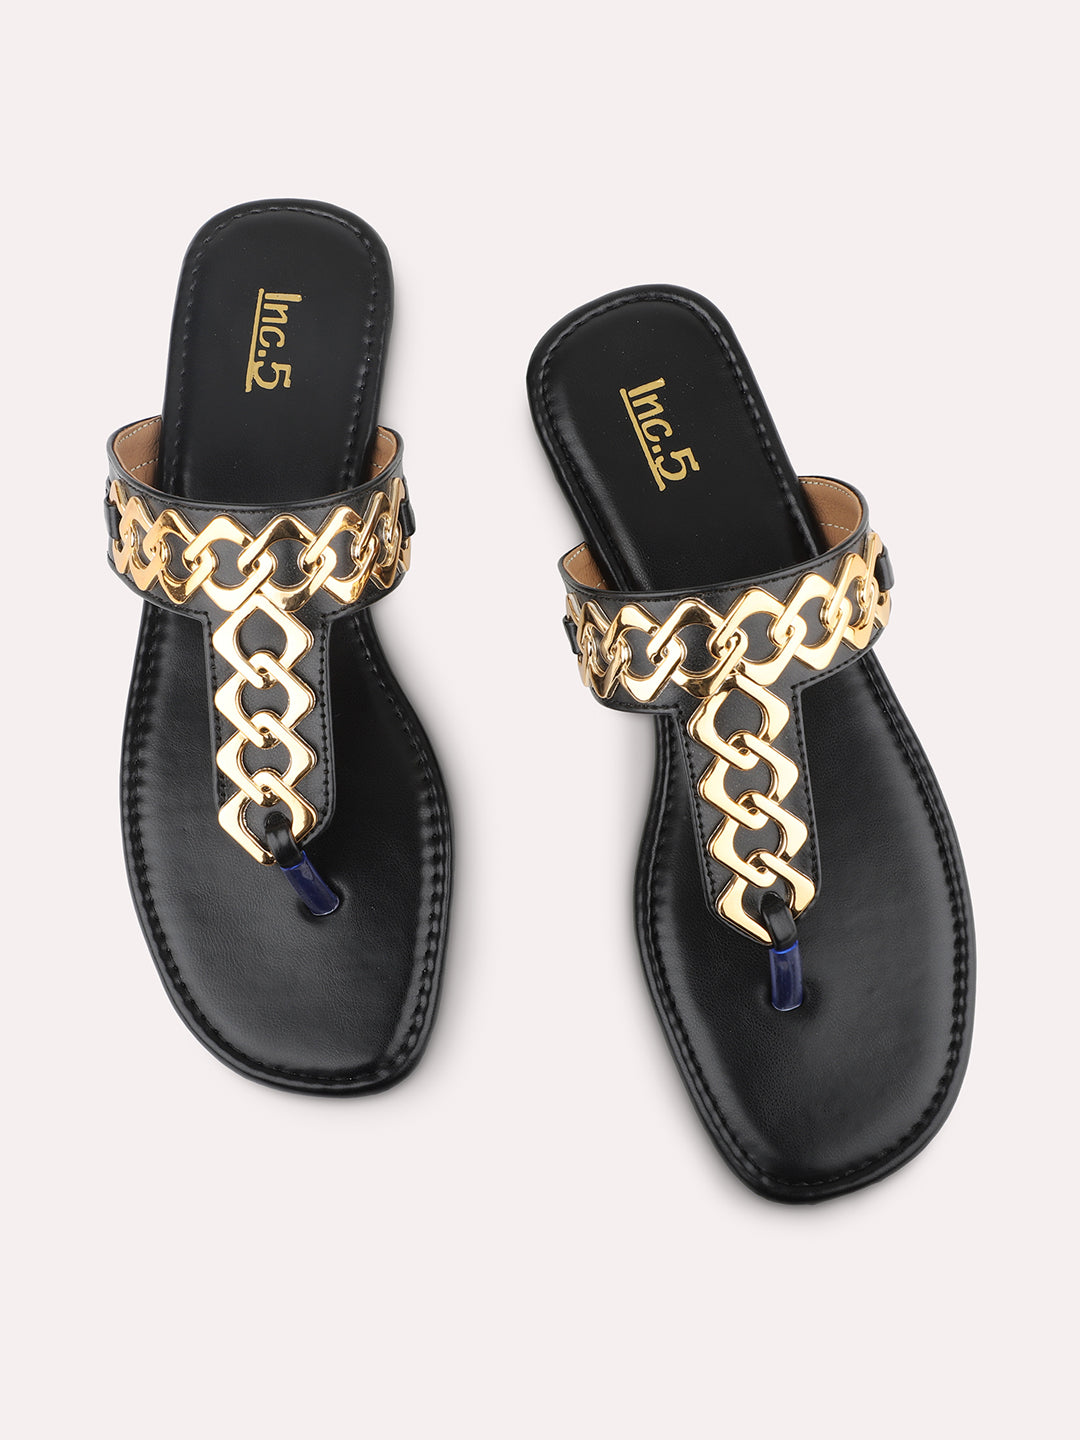 Women Black And Gold-Toned Embellished T-Strap Flats